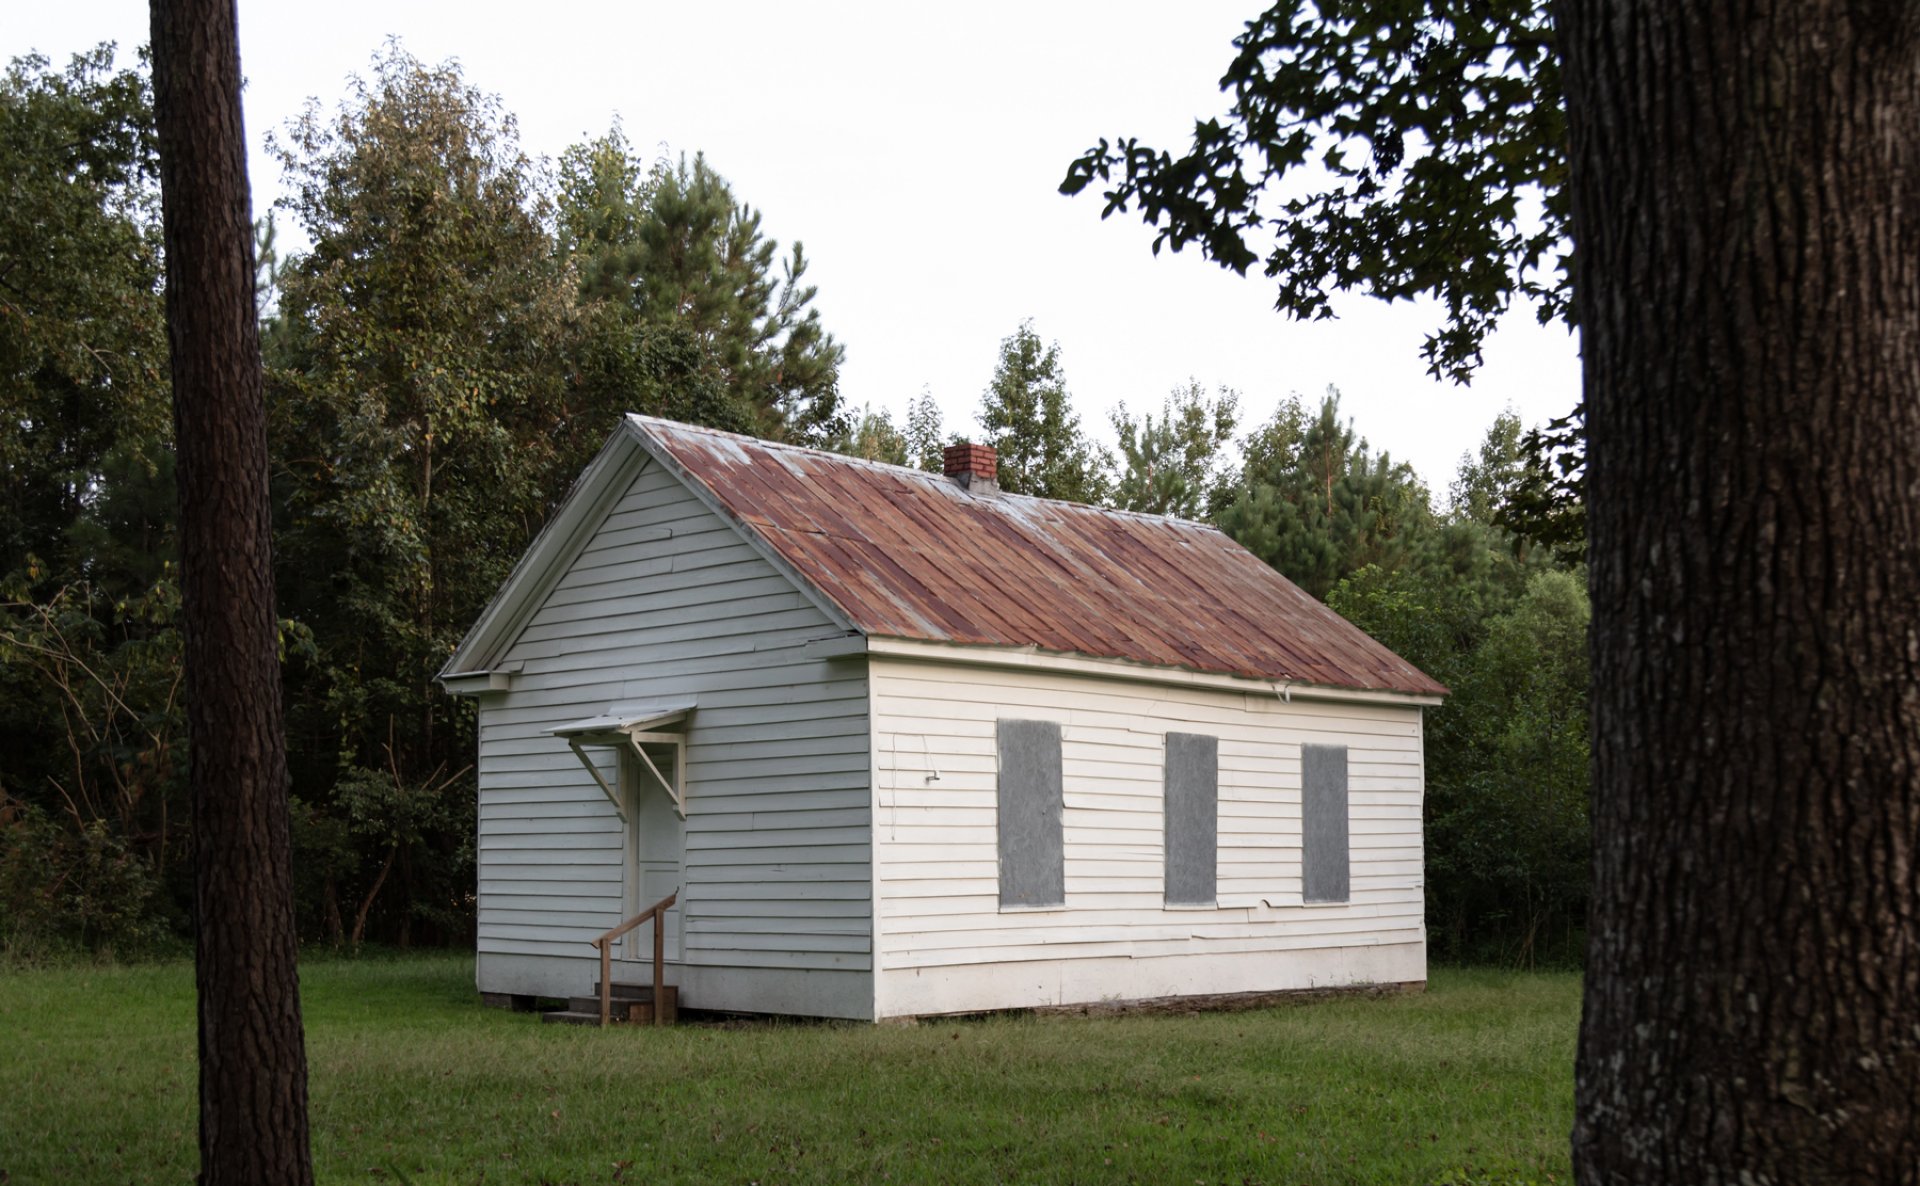 Small one-room schoolhouse in a clearing with trees behind it near Great Dismal Swamp, Virginia